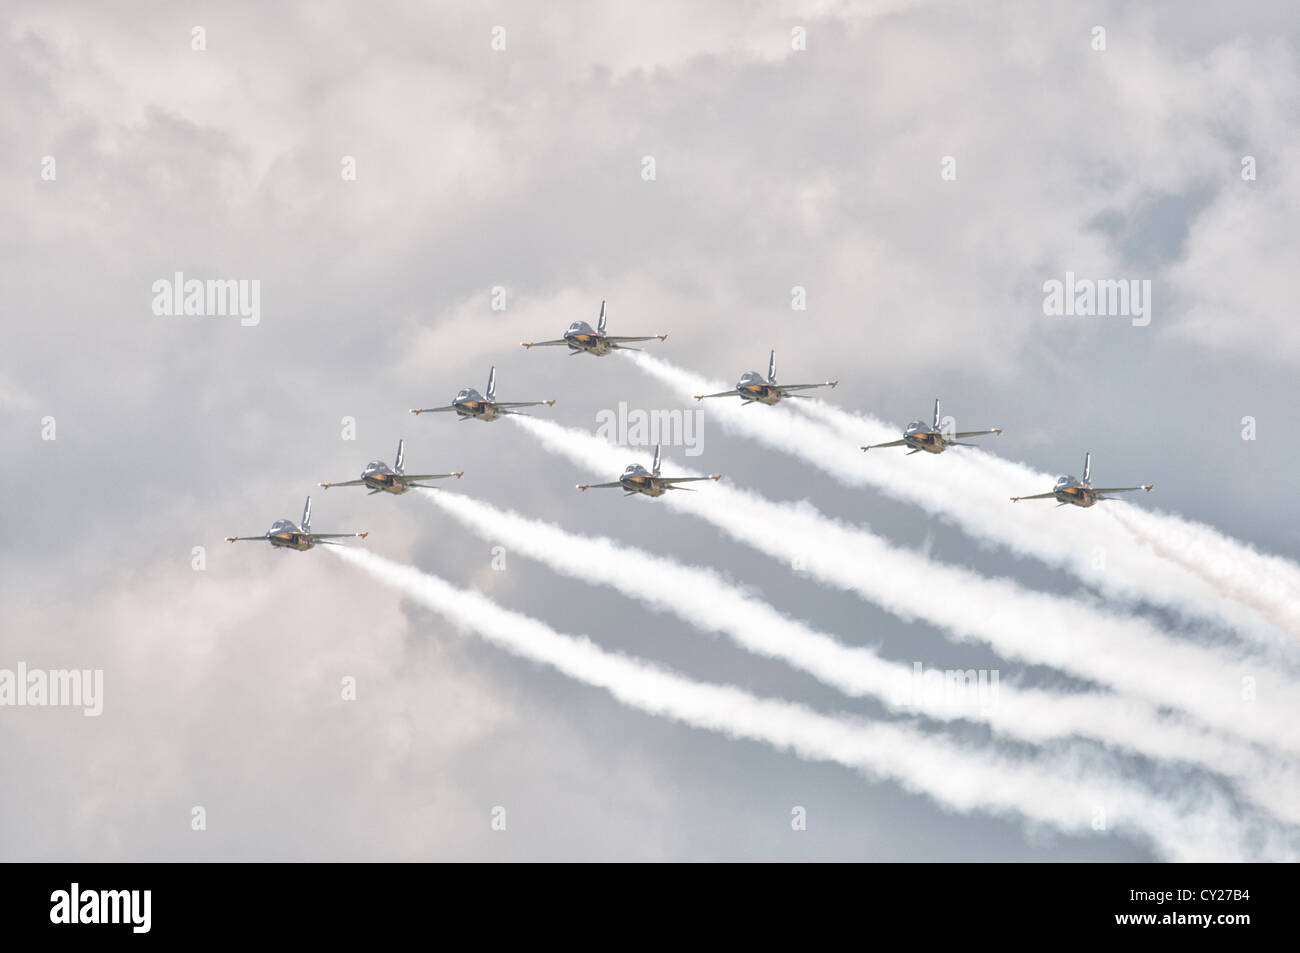 The Black Eagles display team from South Korea perform an amazing display of precision aerobatics in their Korean T-50B Jets Stock Photo